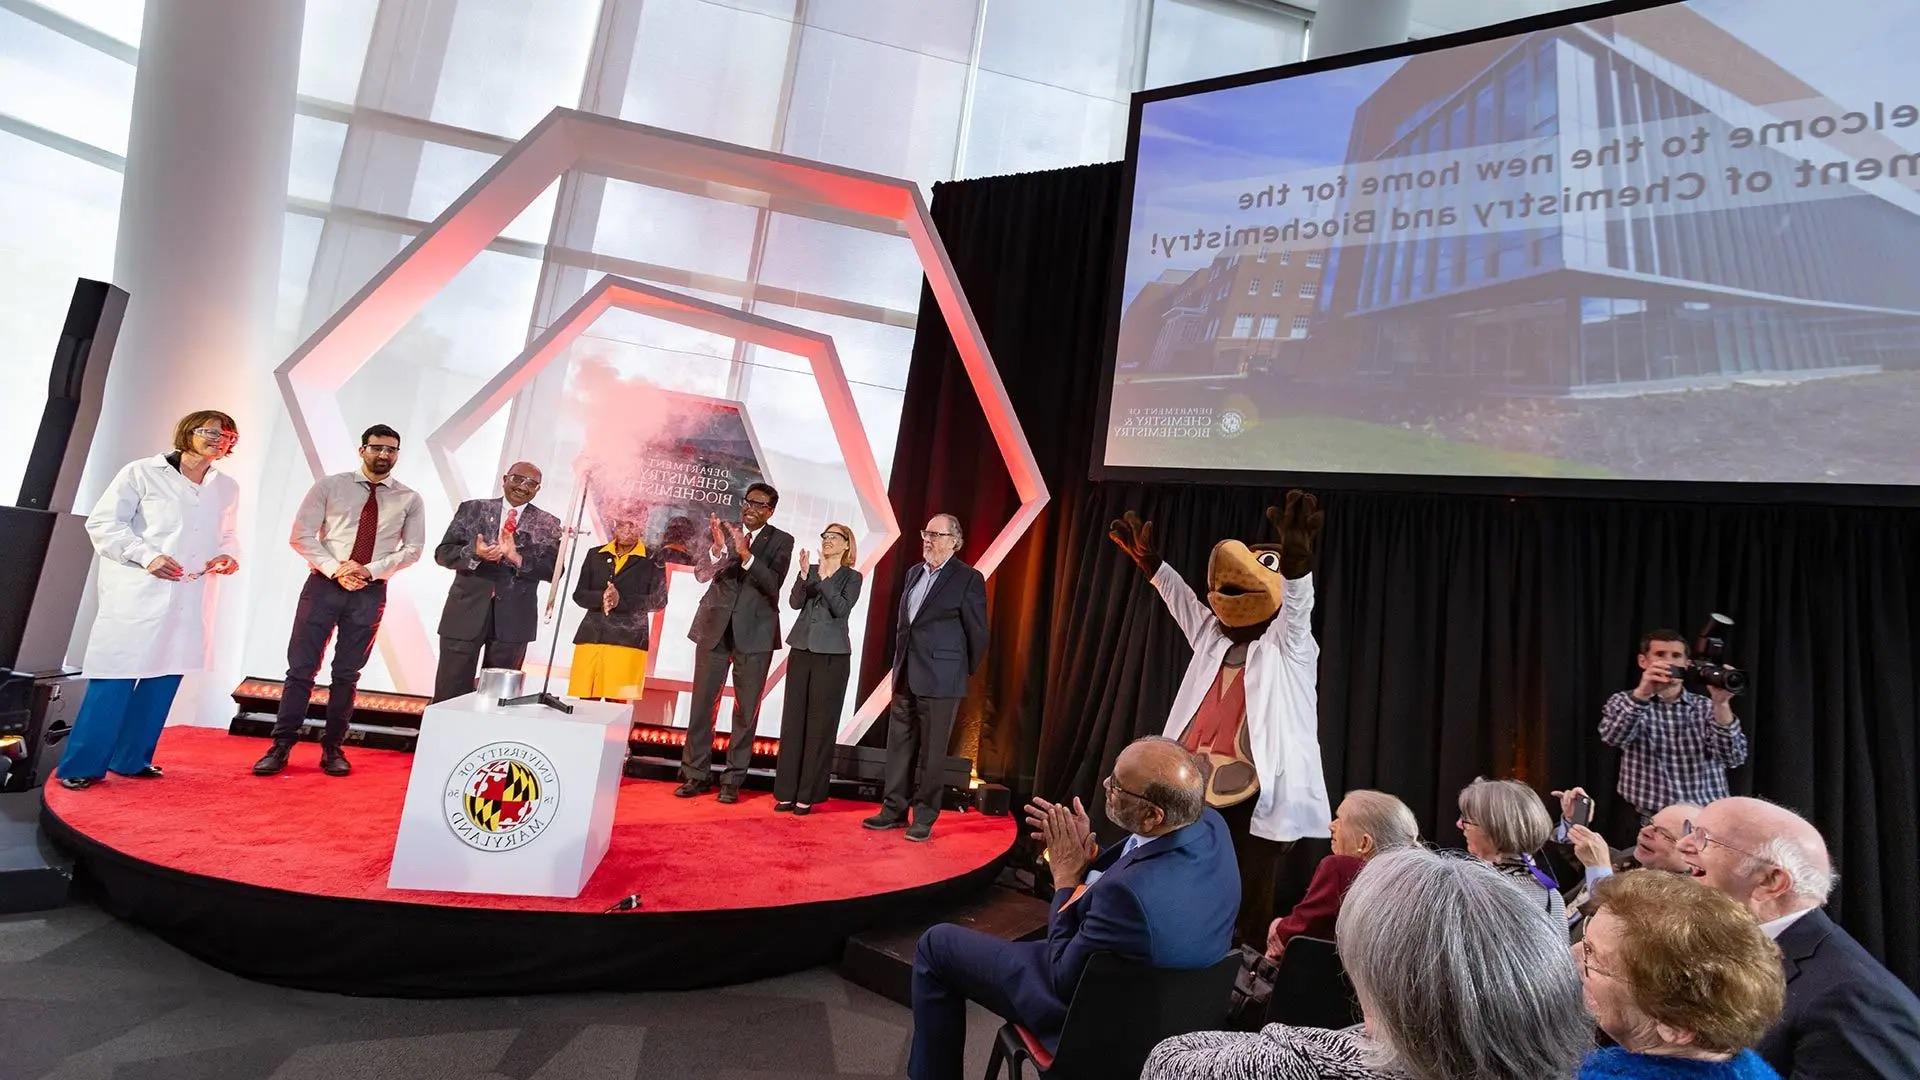 A chemical reaction illuminates a tiny representation of Testudo as the life-size UMD mascot and other participants at a dedication ceremony for the new Chemistry Building applaud. From left: Professor Emeritus Phil DeShong; Senior Vice President and Provost Jennifer King Rice; President Darryll J. Pines; Maryland House of Delegates Speaker Adrienne A. Jones; College of Computer, Mathematical, and Natural Sciences Dean Amitabh Varshney; doctoral student Hector Cein Mandujano and Department of Chemistry